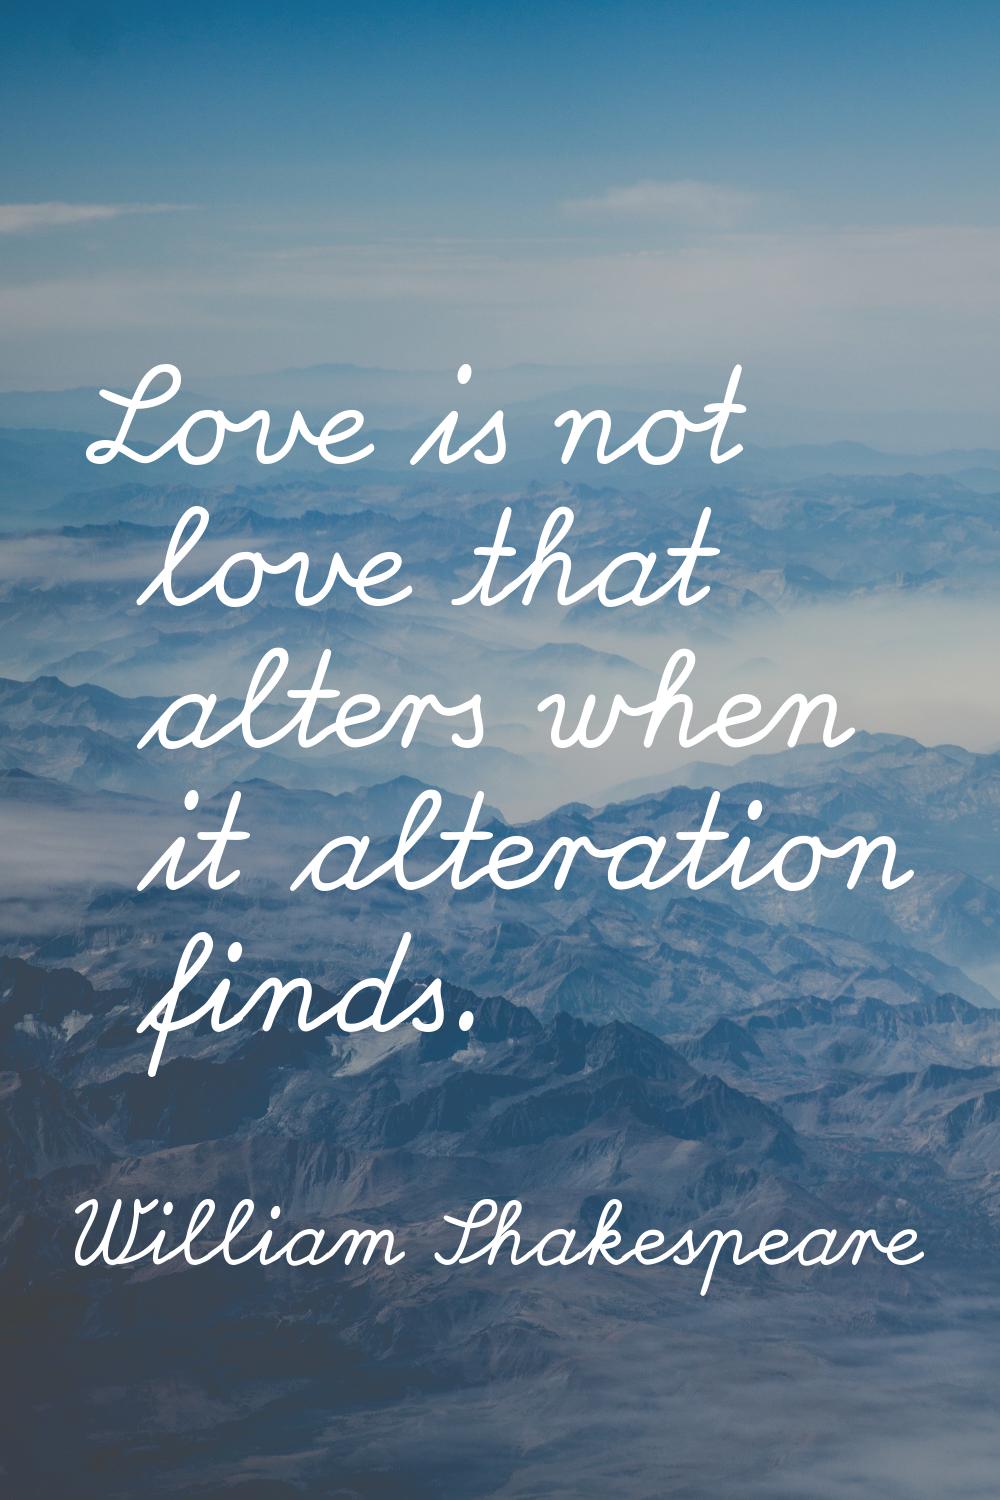 Love is not love that alters when it alteration finds.